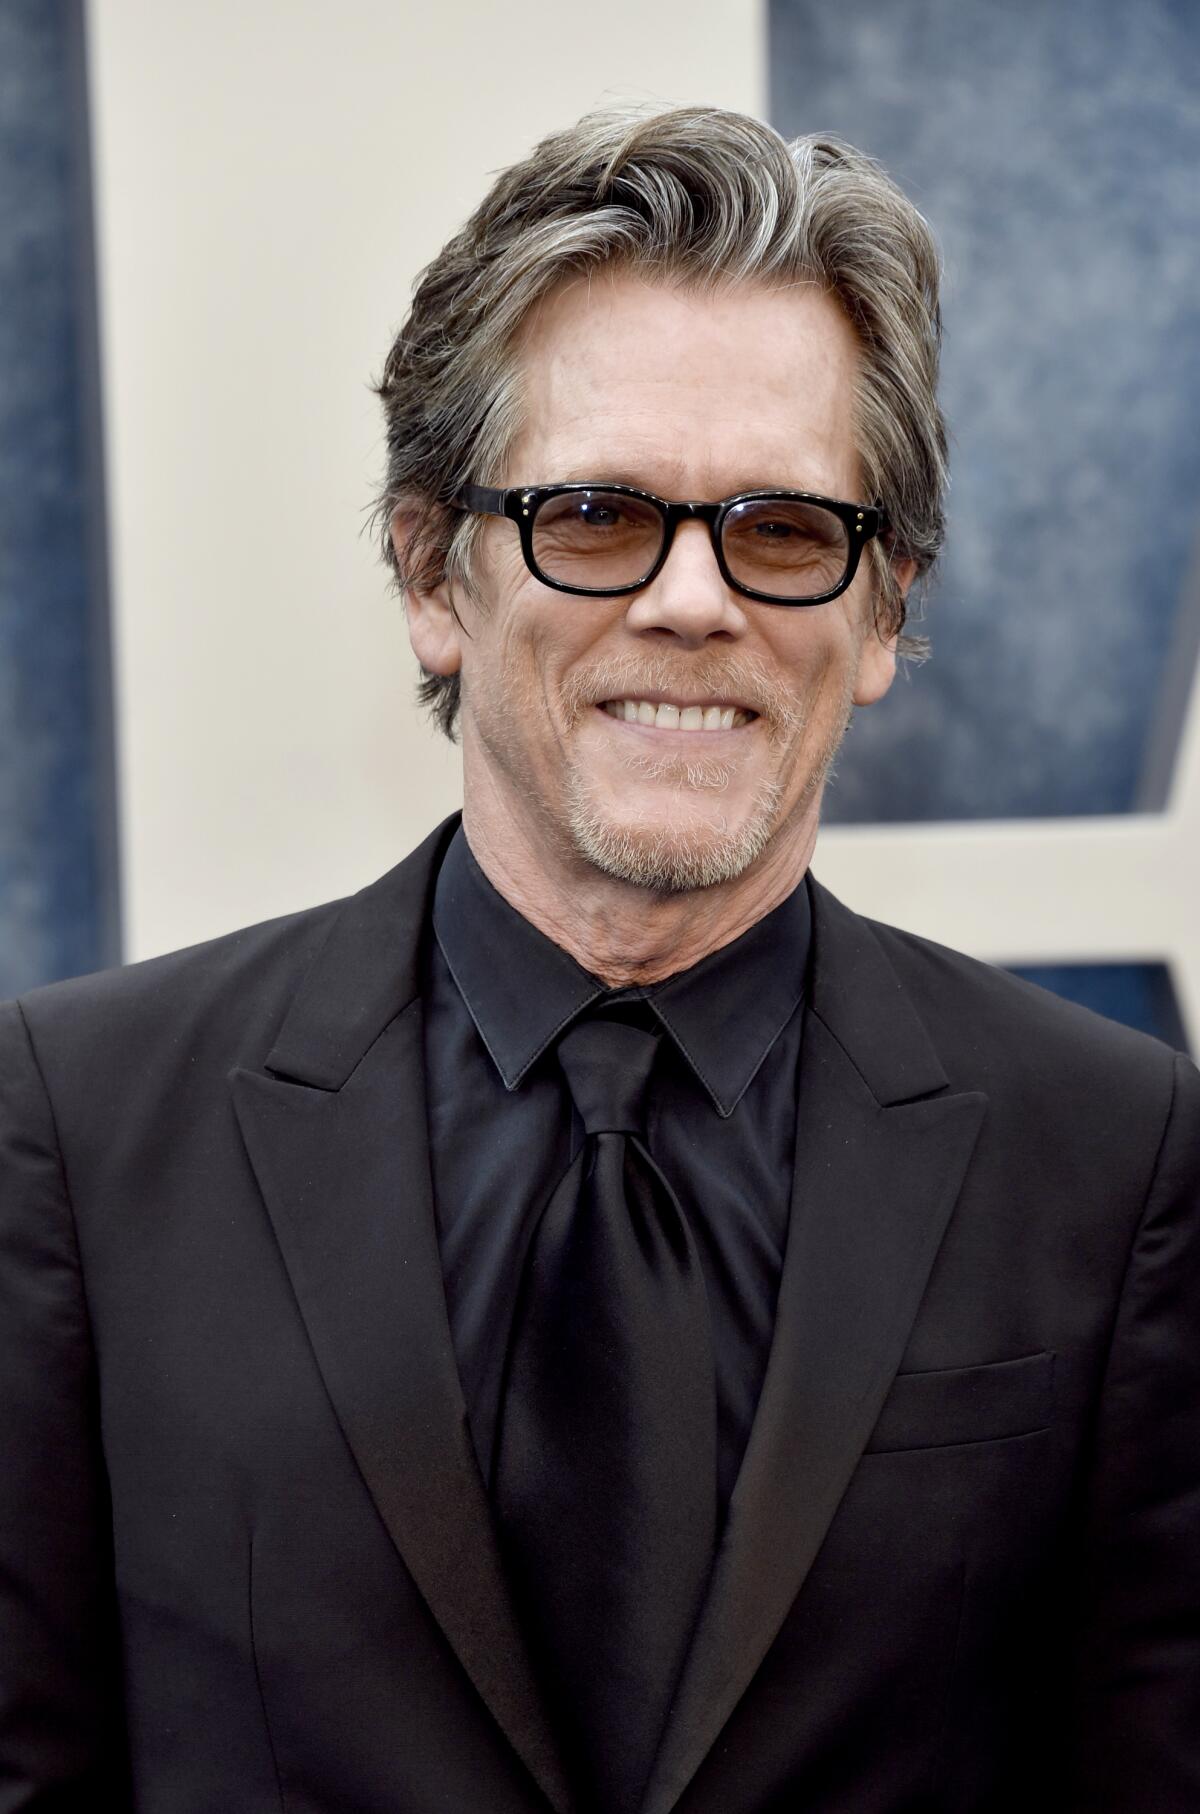 Kevin Bacon smiles while posing in dark glasses and a black suit and tie